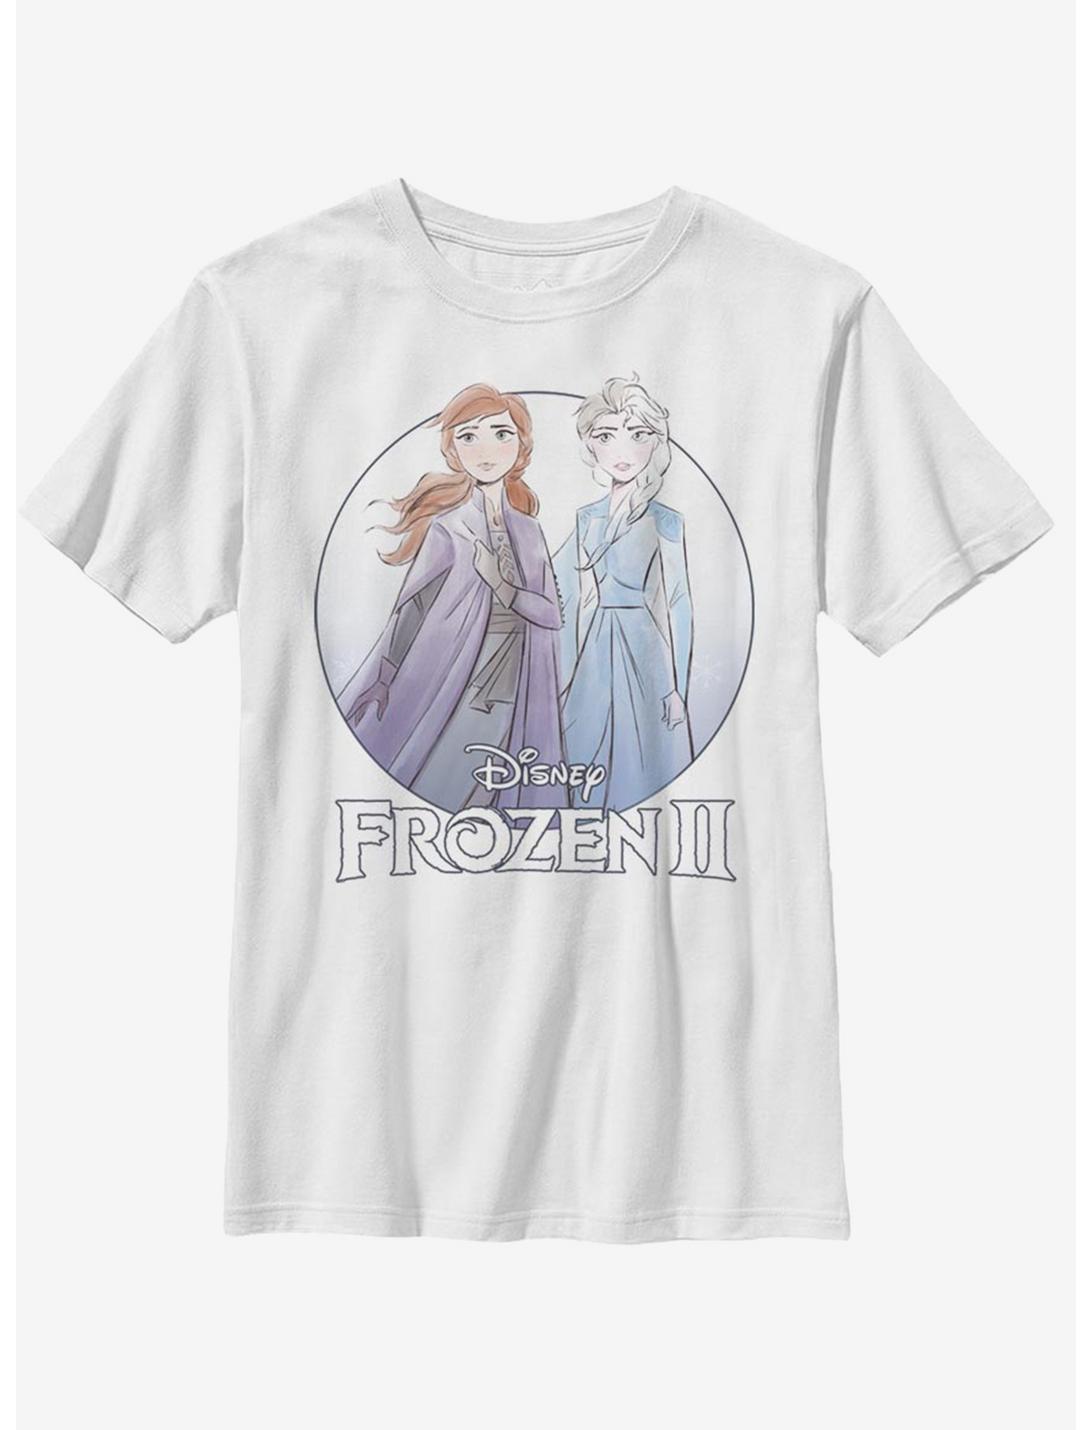 Disney Frozen 2 The Journey Youth T-Shirt, WHITE, hi-res